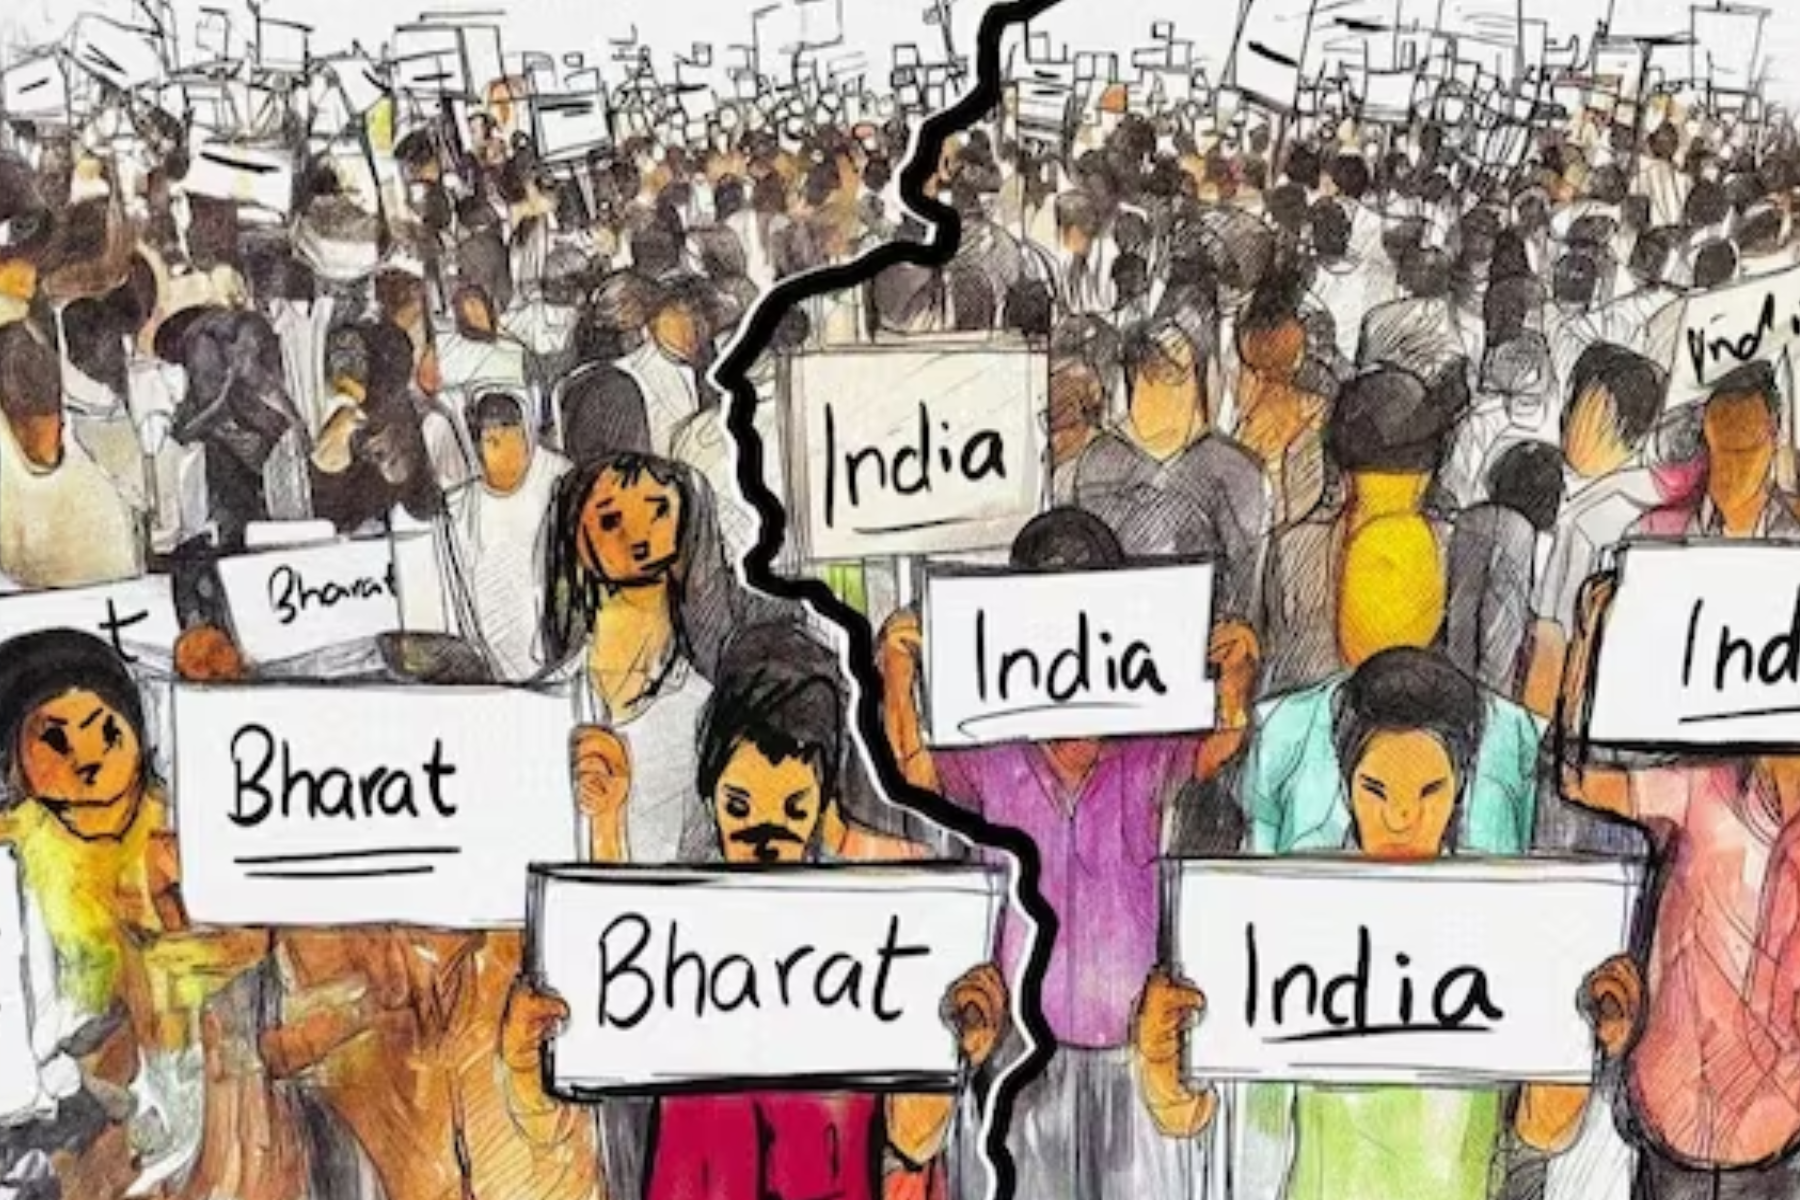 Protesters holding banners reading "India" and "Bharat"